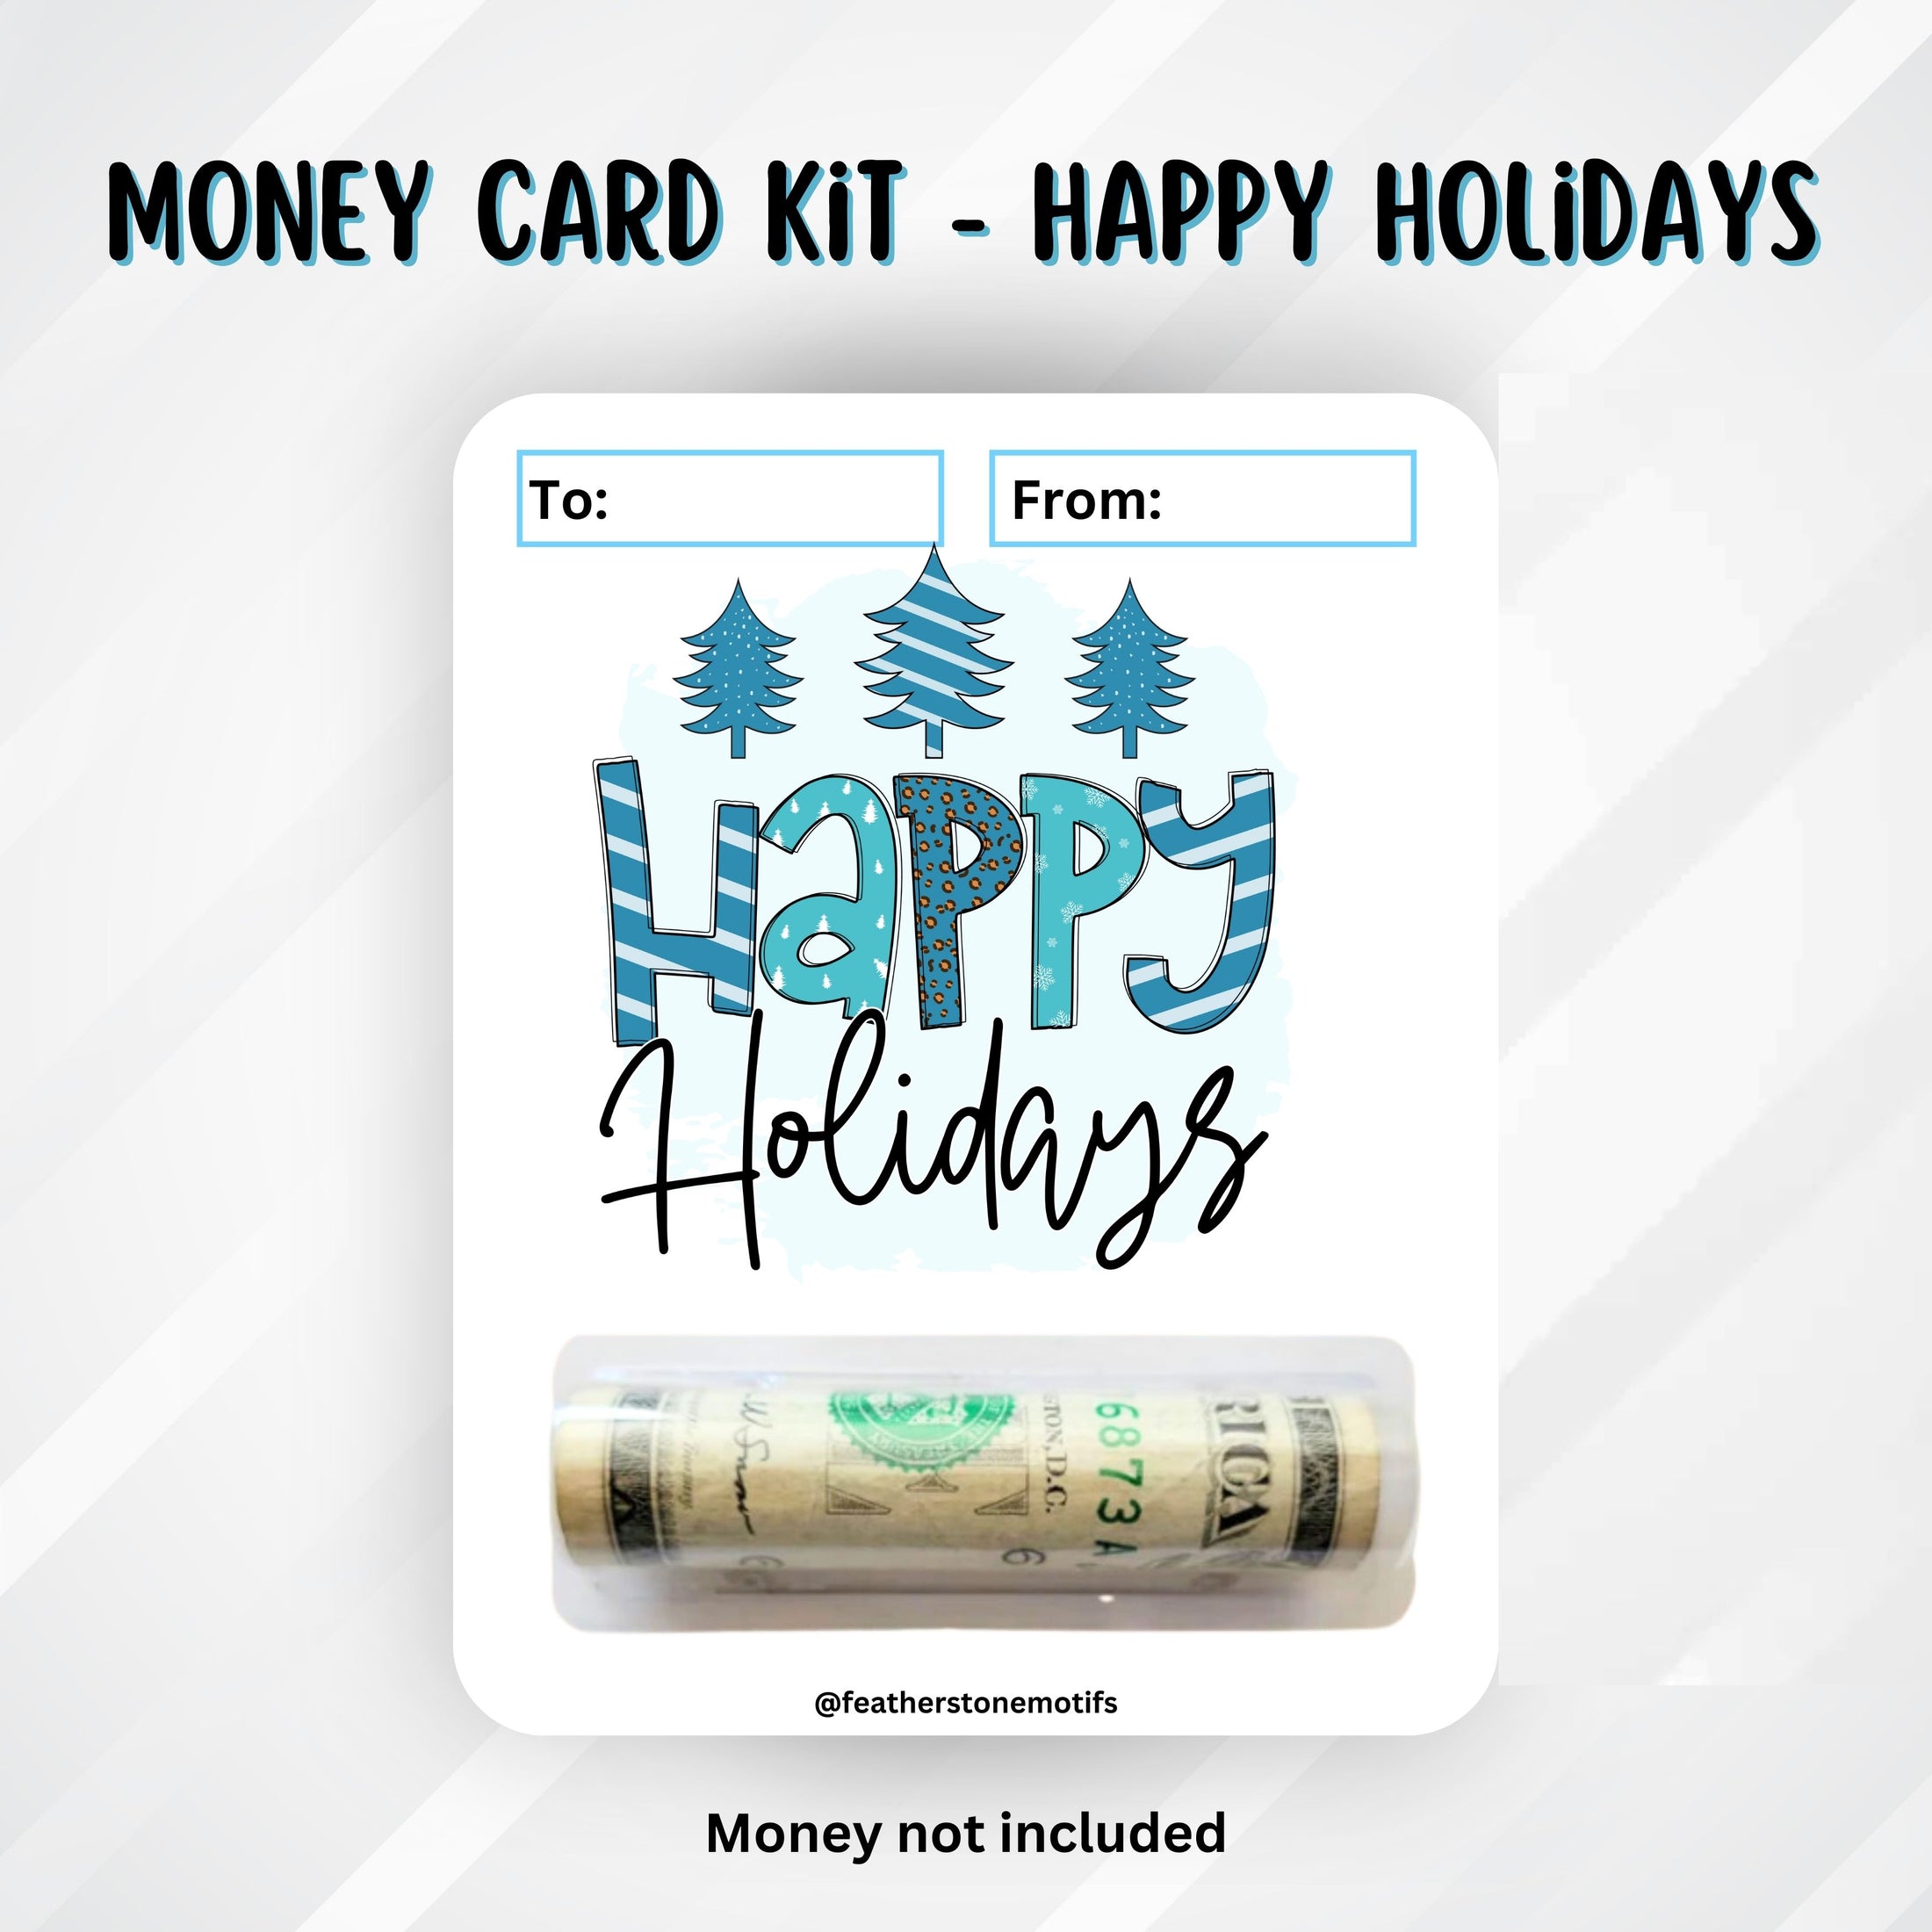 This image shows the money tube attached to the Happy Holidays Money Card.